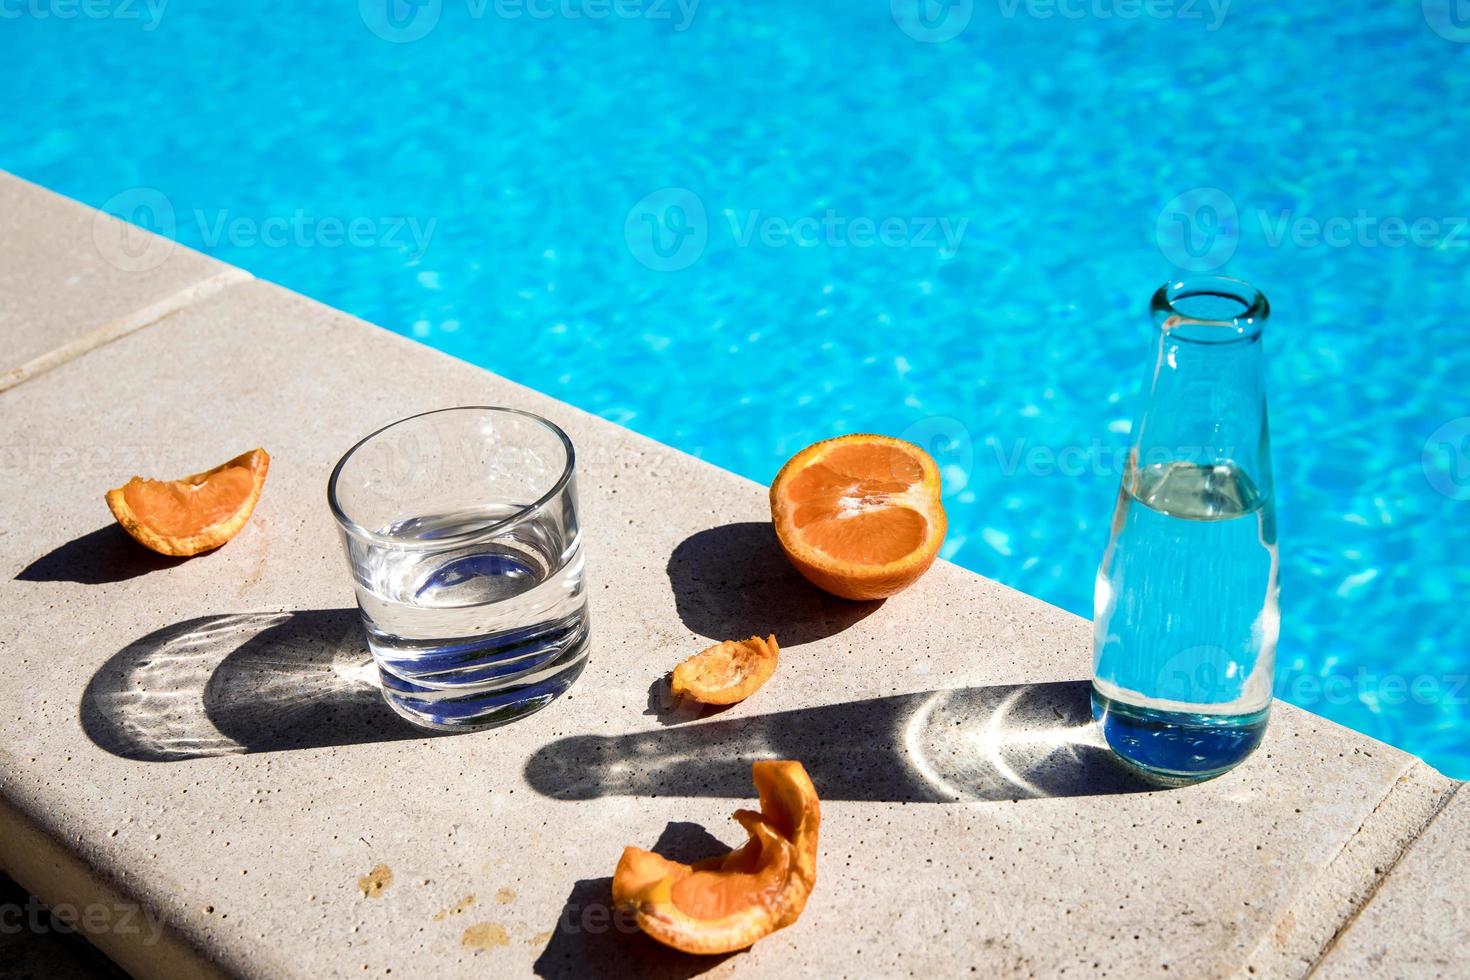 glasses and fruits next to the pool photo